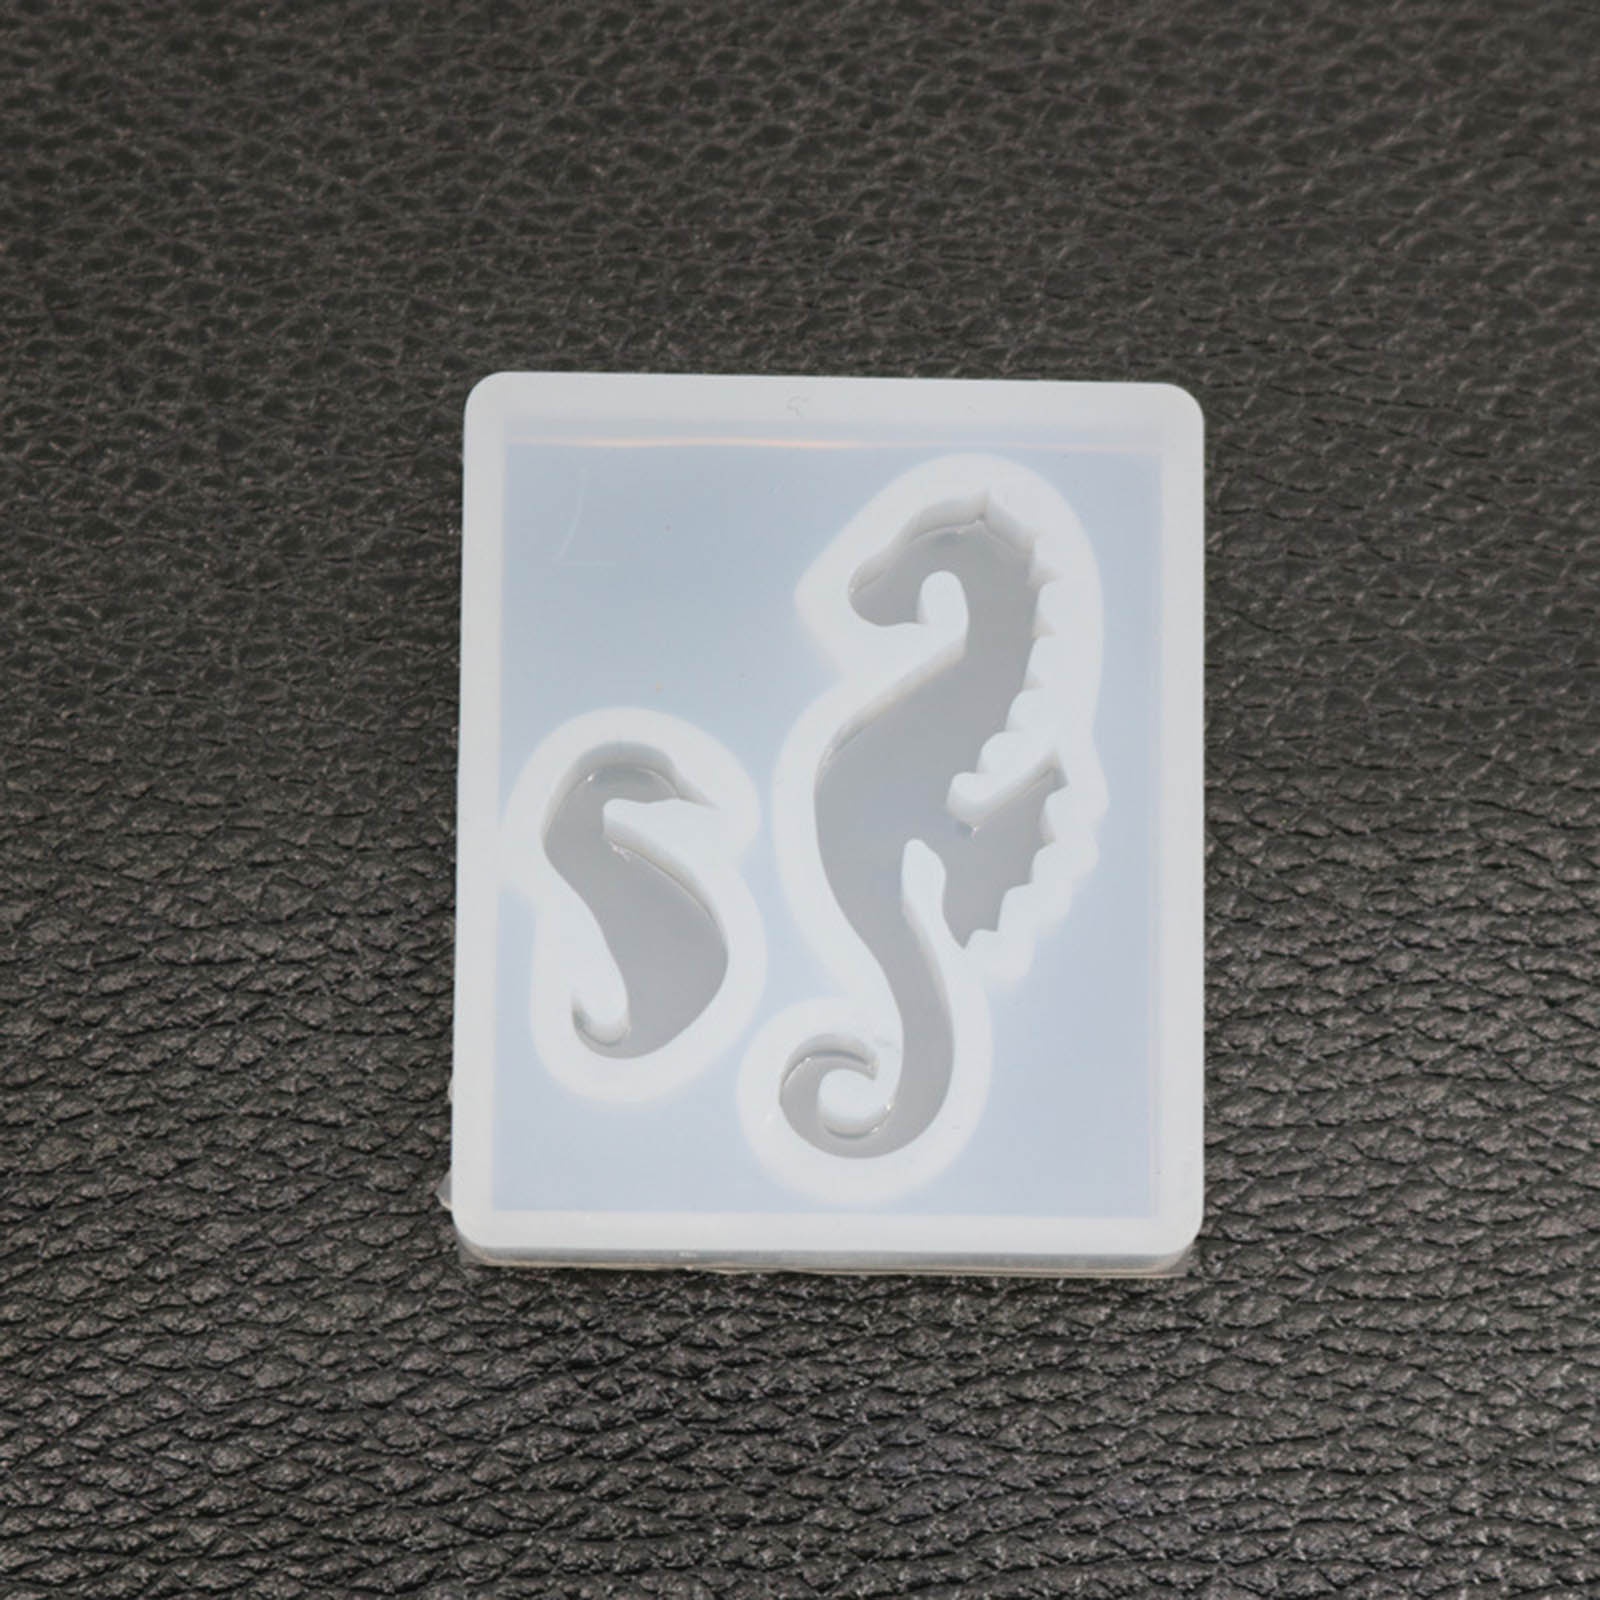 Picture of Silicone Resin Mold For Jewelry Making Pendant Rectangle Seahorse White 4.3cm x 3.6cm, 1 Piece